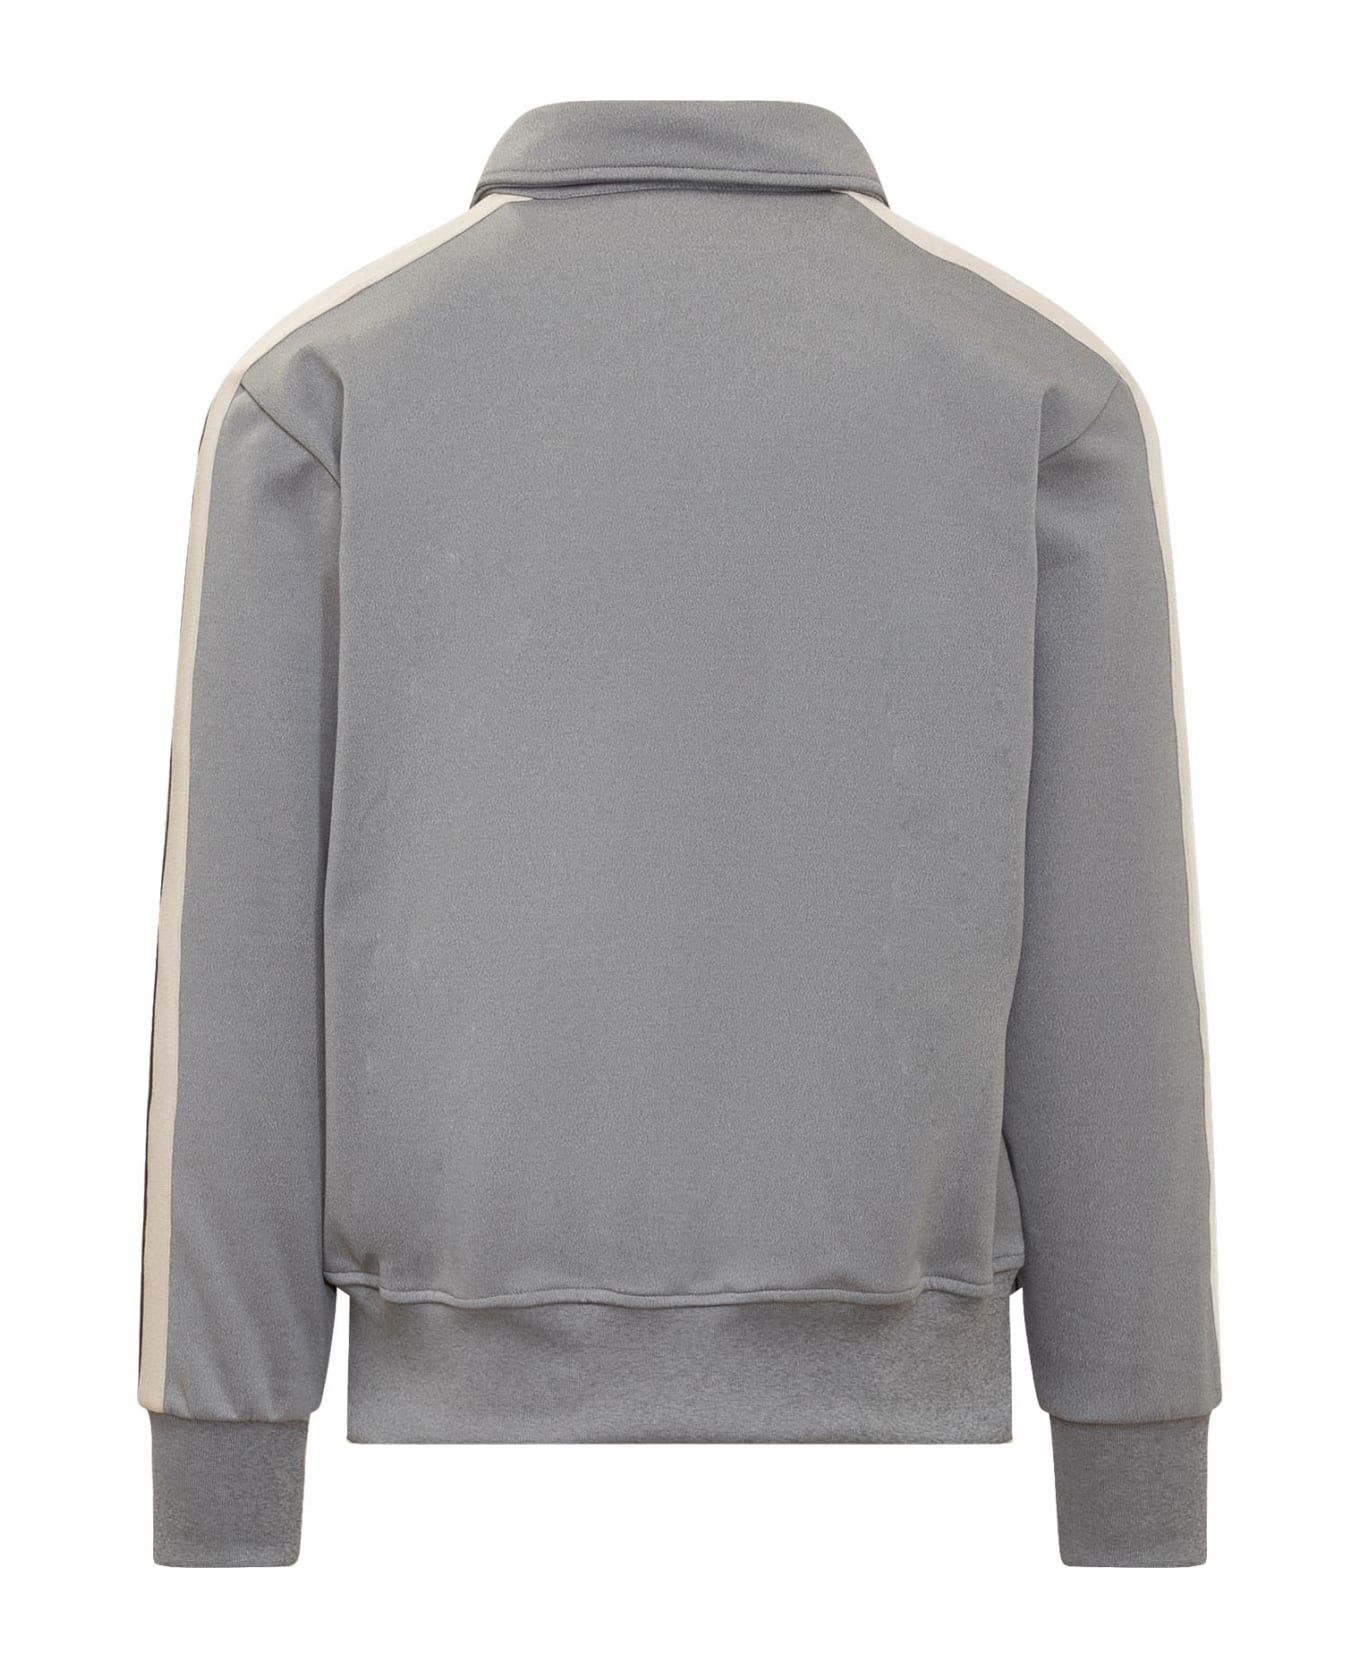 Palm Angels Sweatshirt With Bands Along The Sleeves - MELANGE GREY フリース